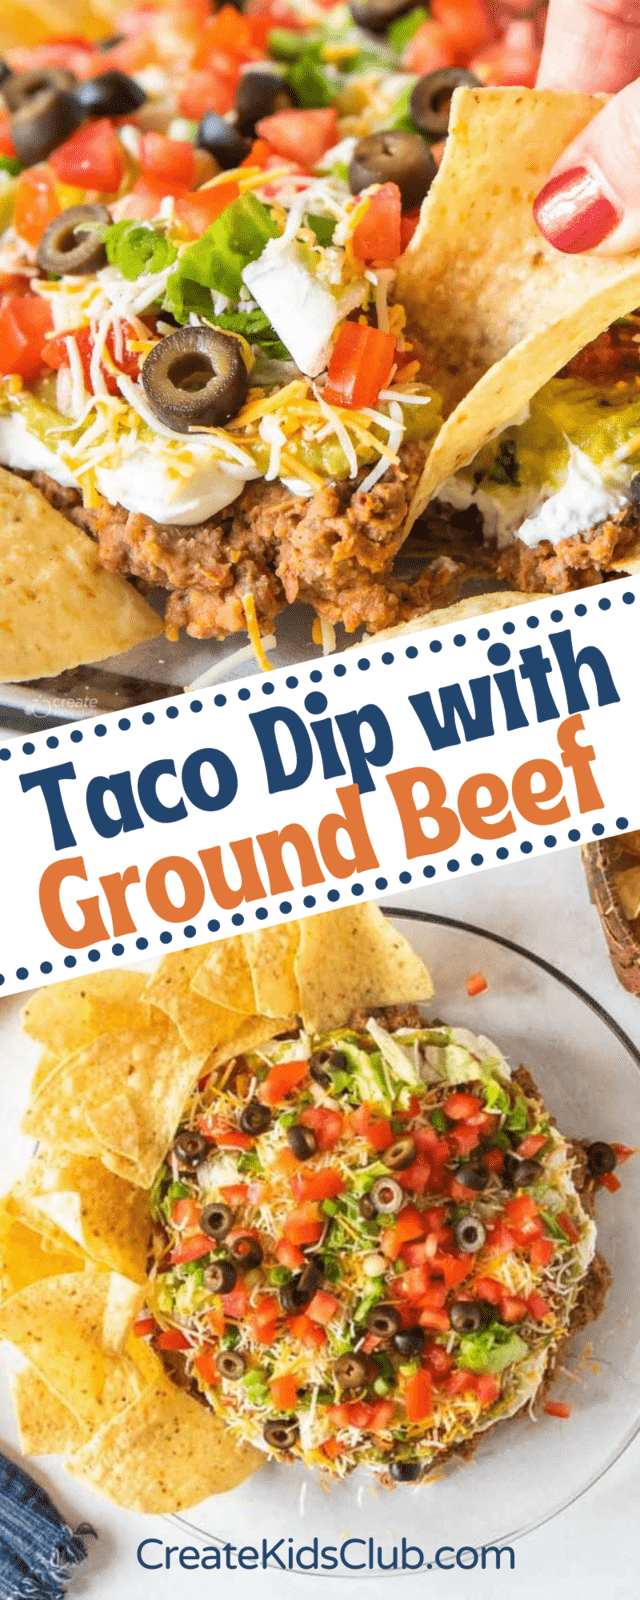 Pinterest image of taco dip with ground beef